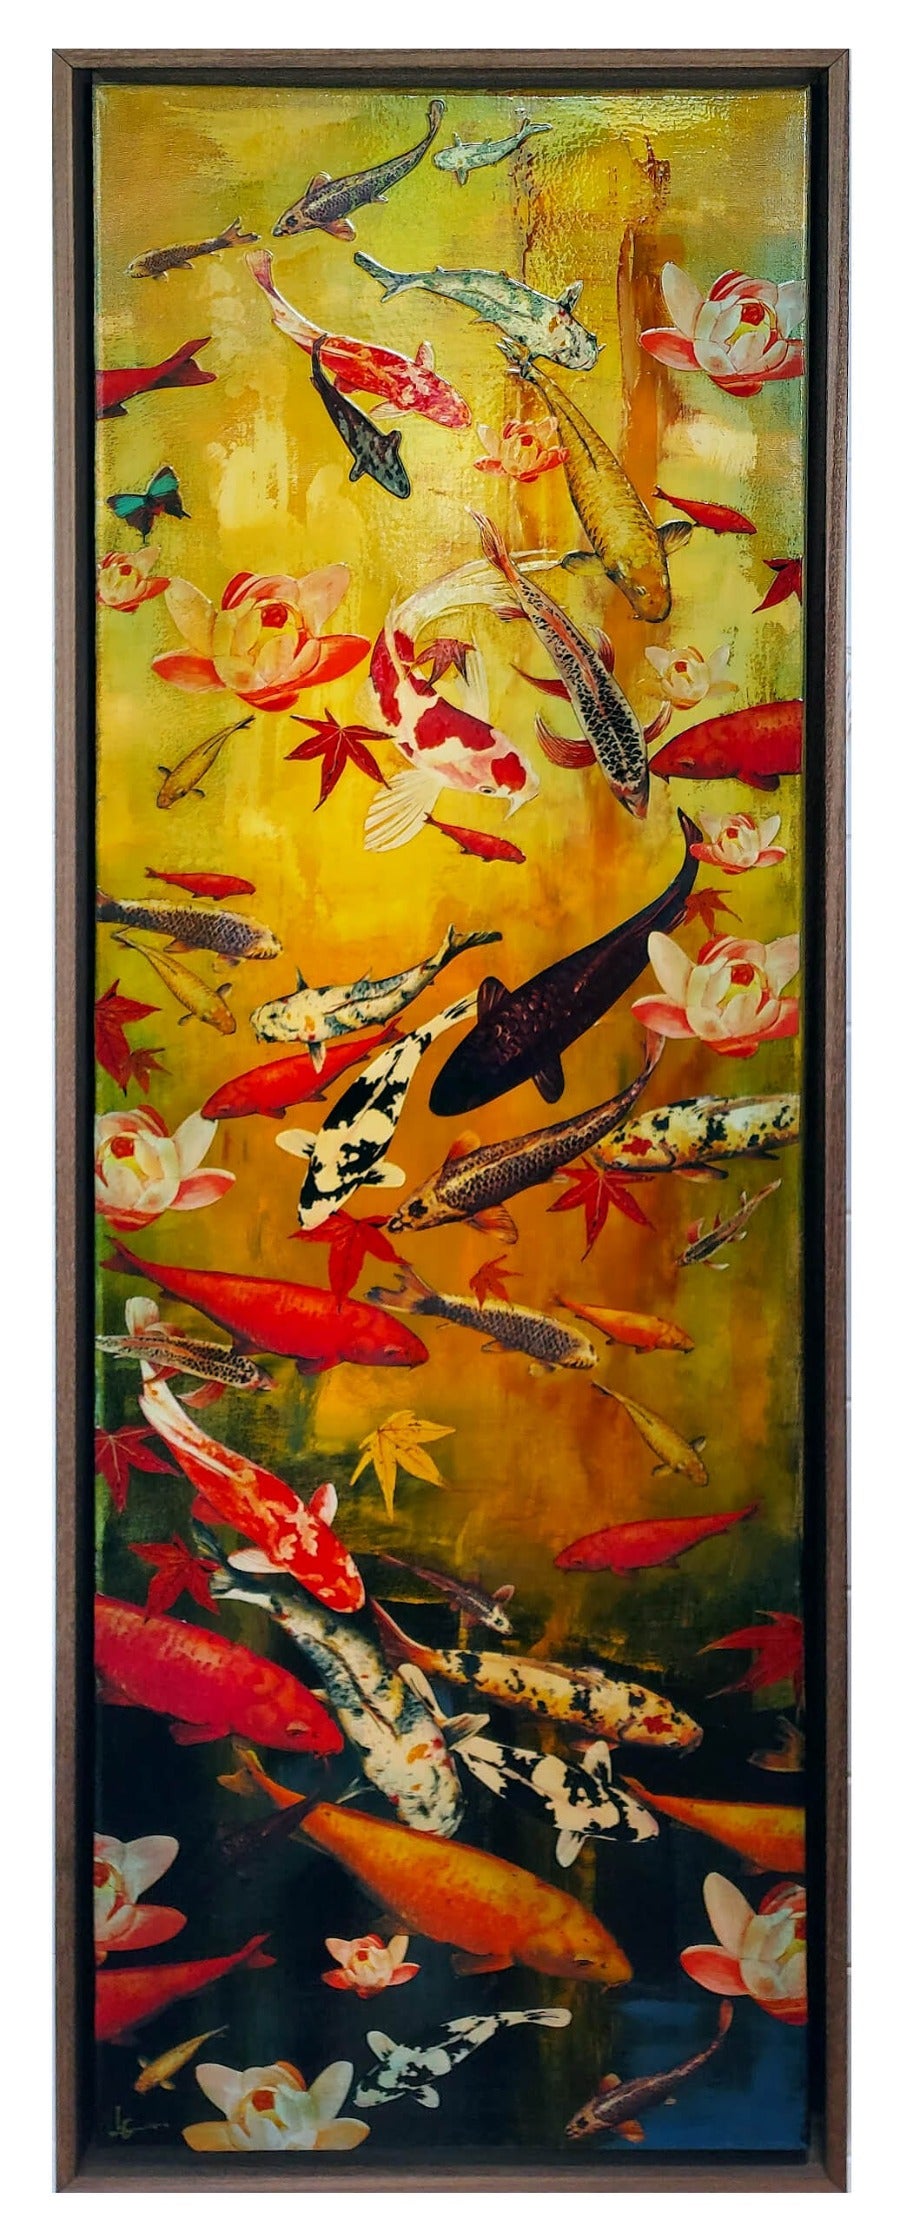 Koi on Yellow Ochre and Black by Lily Greenwood | Contemporary Painting for sale at The Biscuit Factory Newcastle